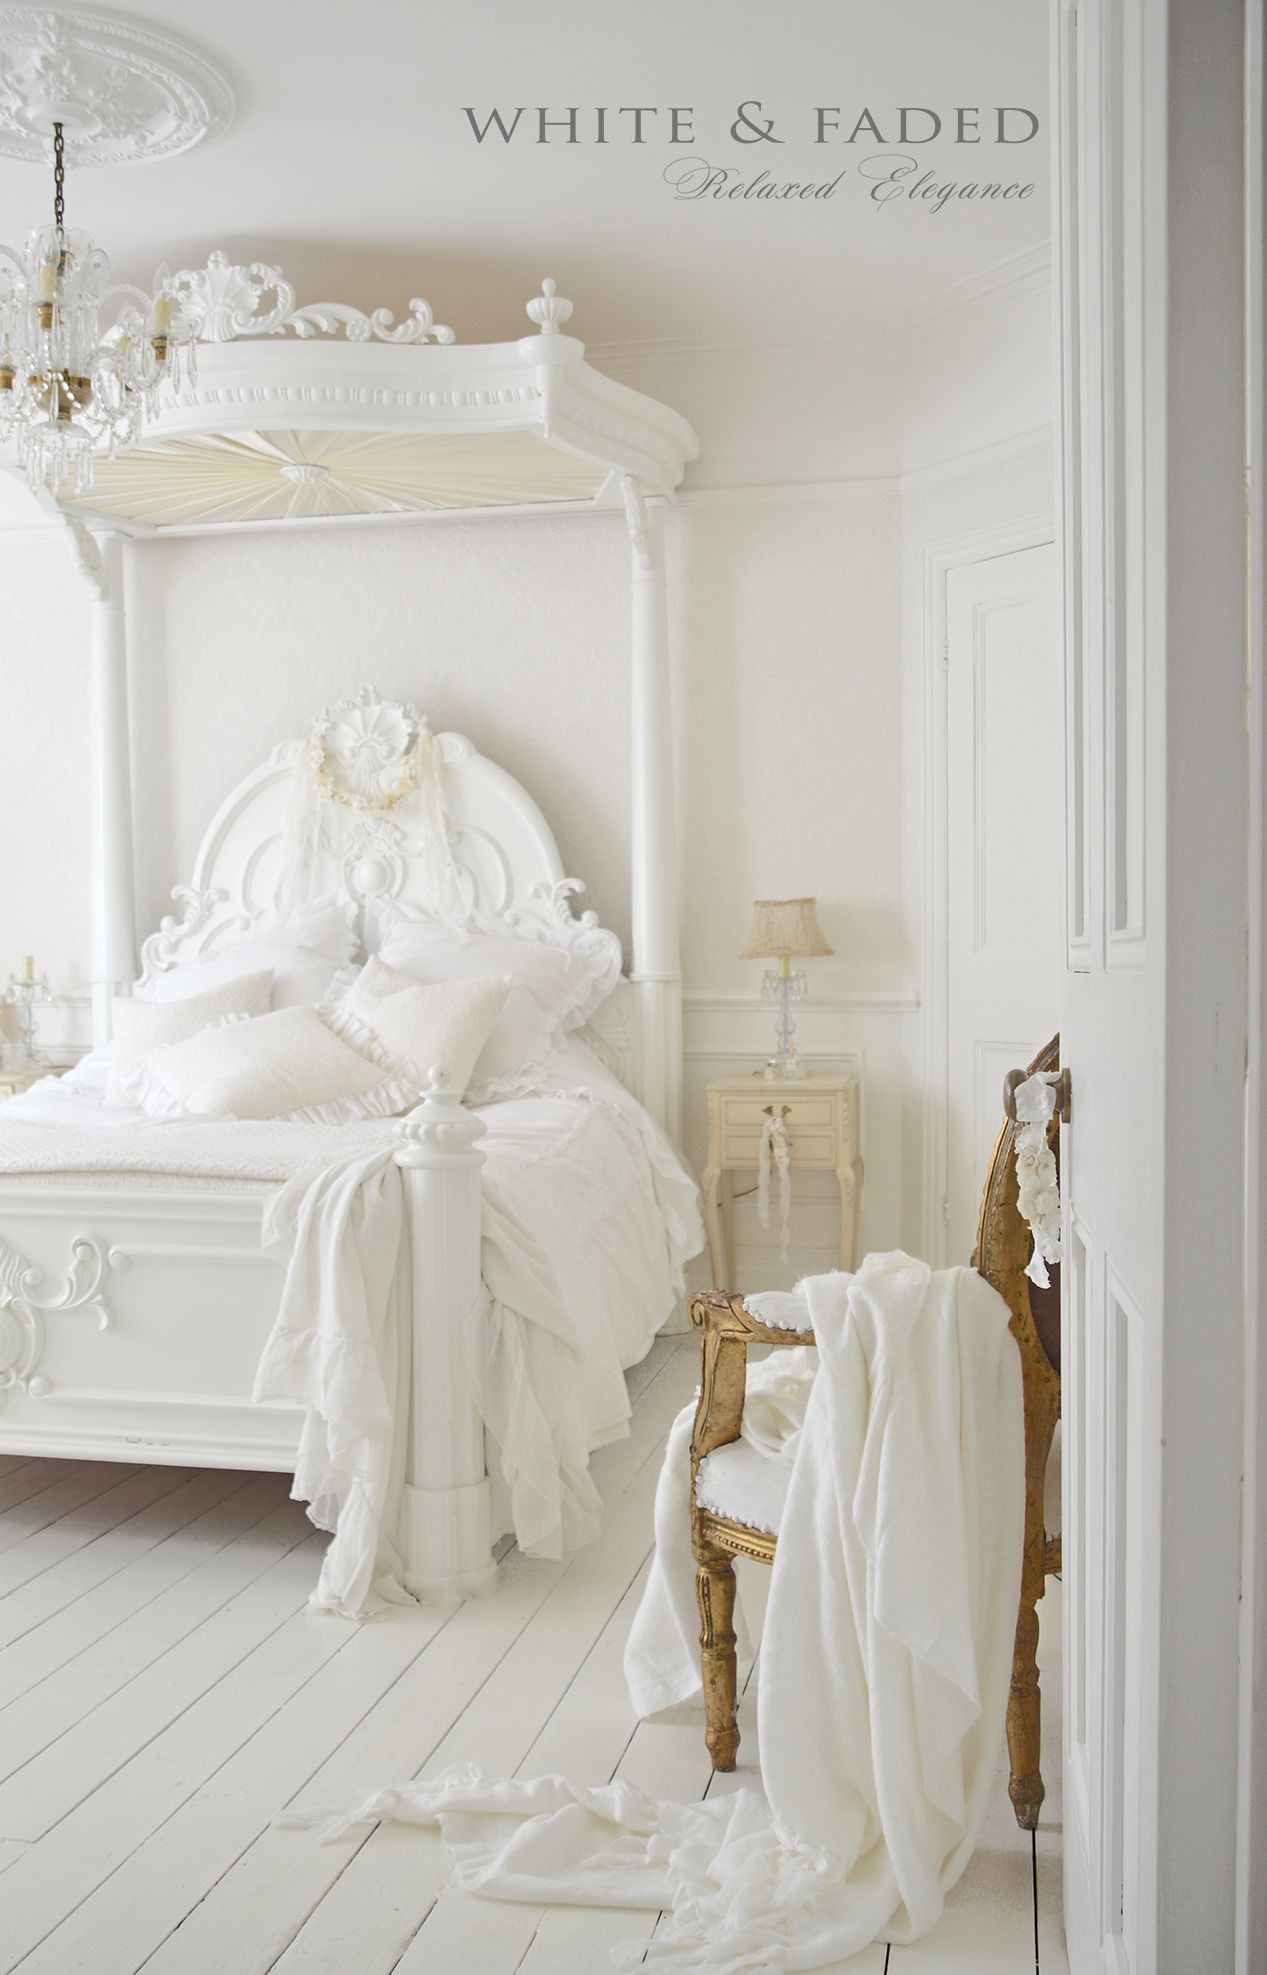 French Shabby Chic Bedroom Ideas
 White French bedroom